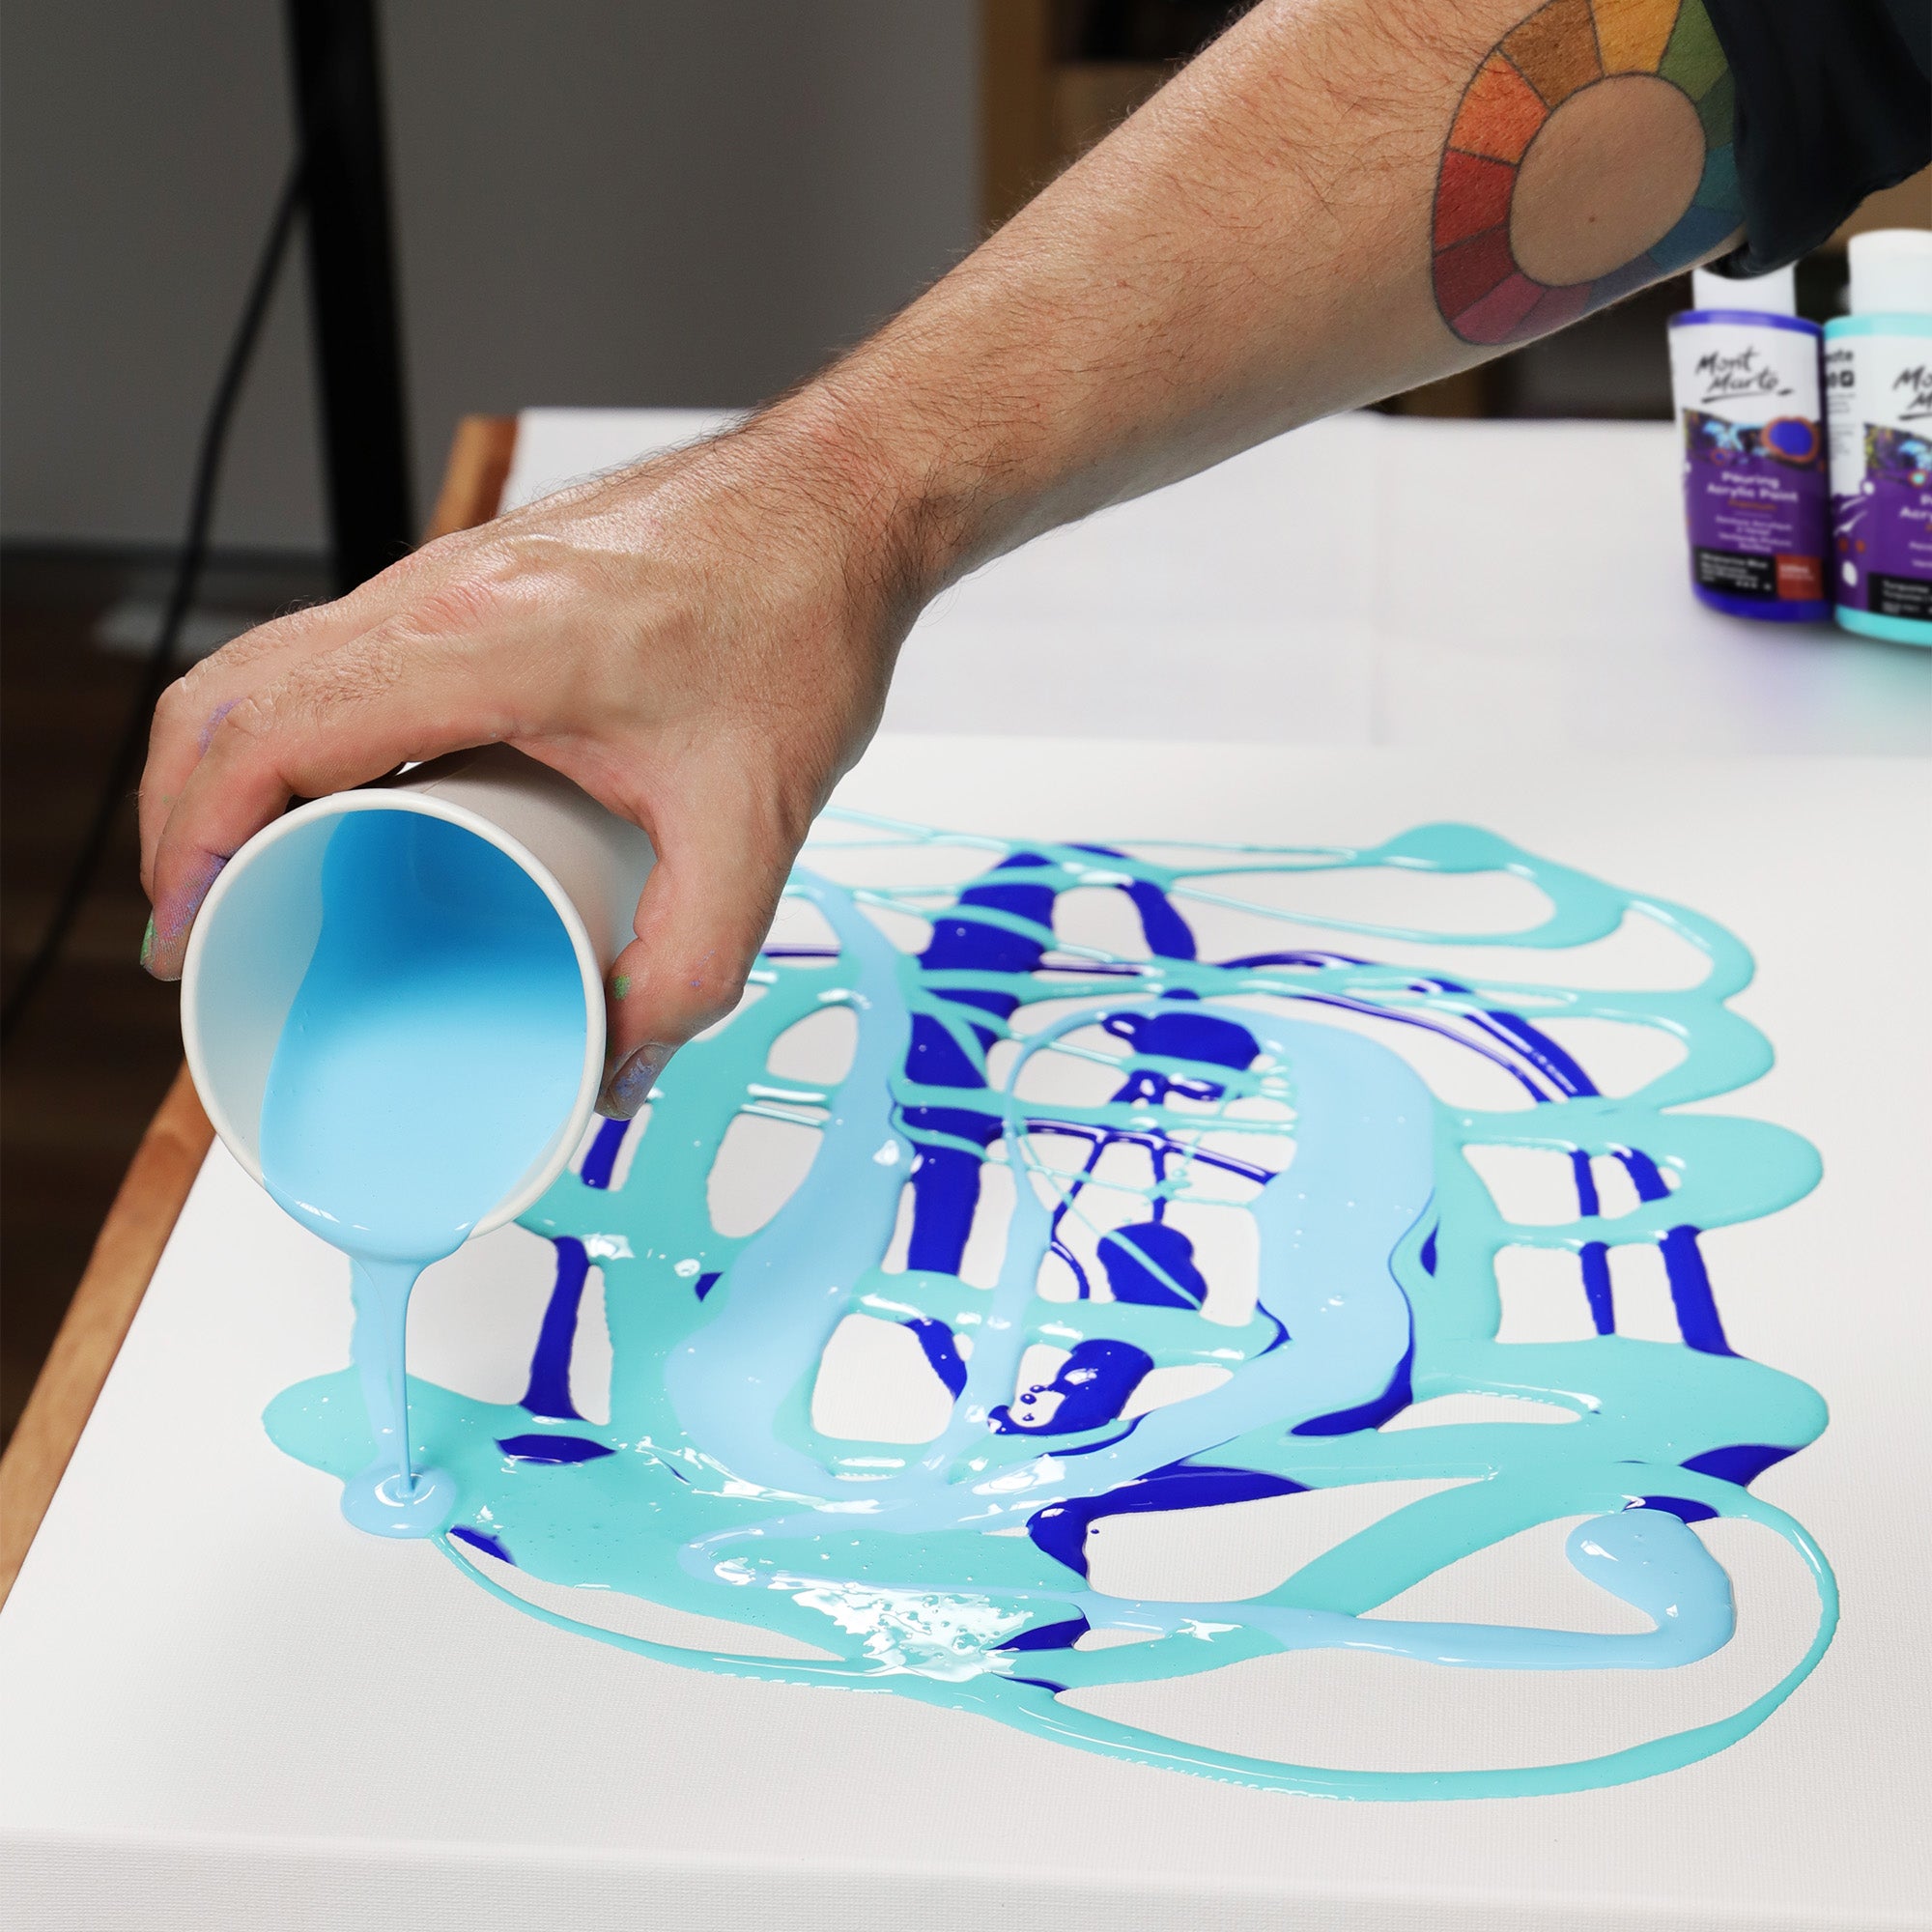 3. Blue acrylic paints being poured onto a fluid canvas